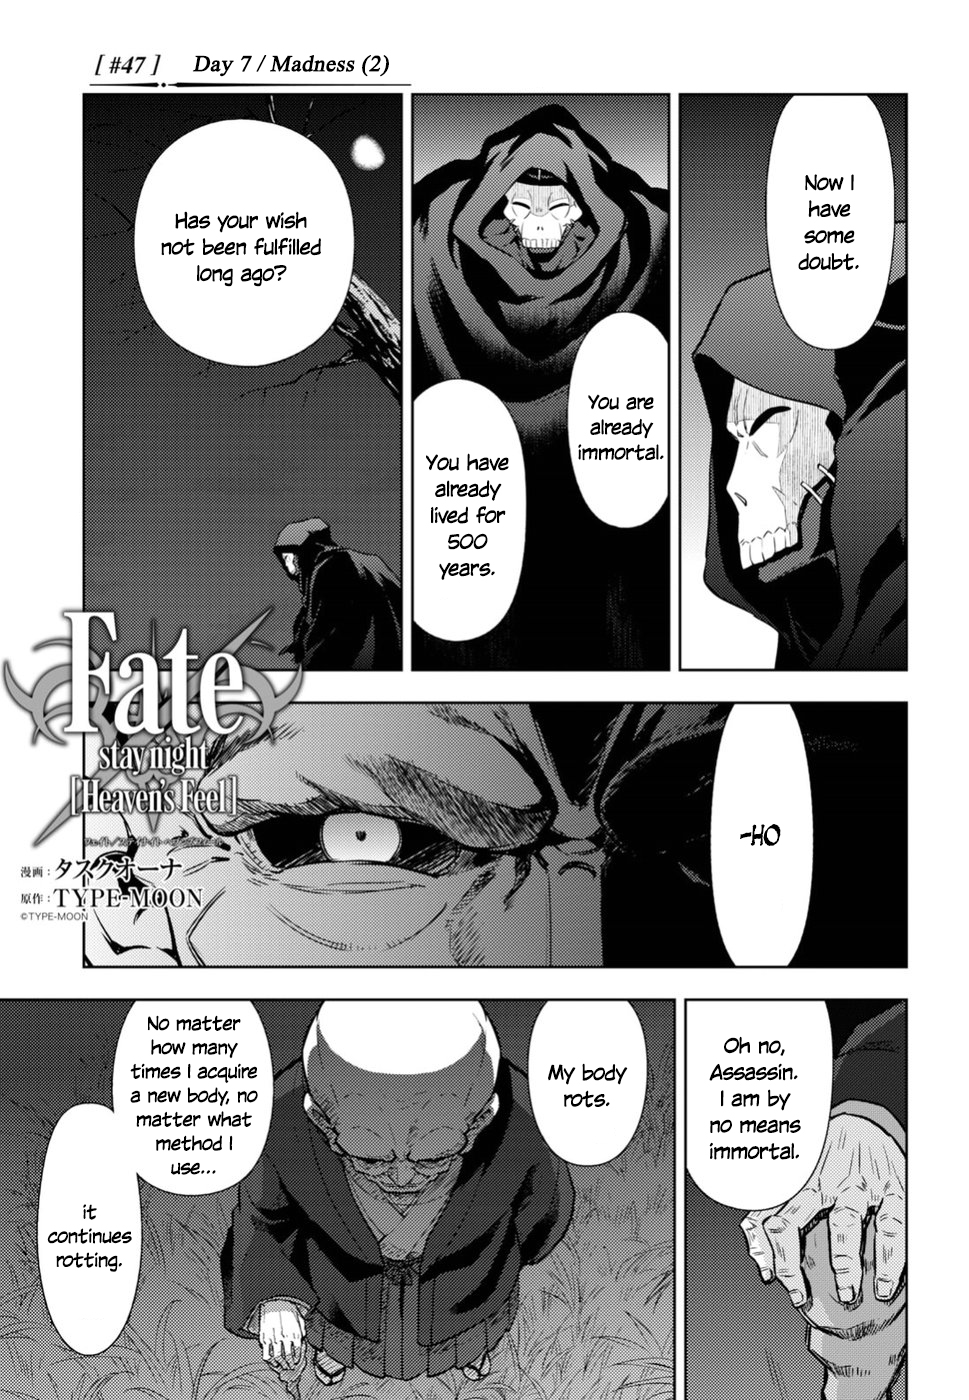 Fate/stay Night - Heaven's Feel Vol.8 Chapter 47: Day 7 / Madness (2) - Picture 1